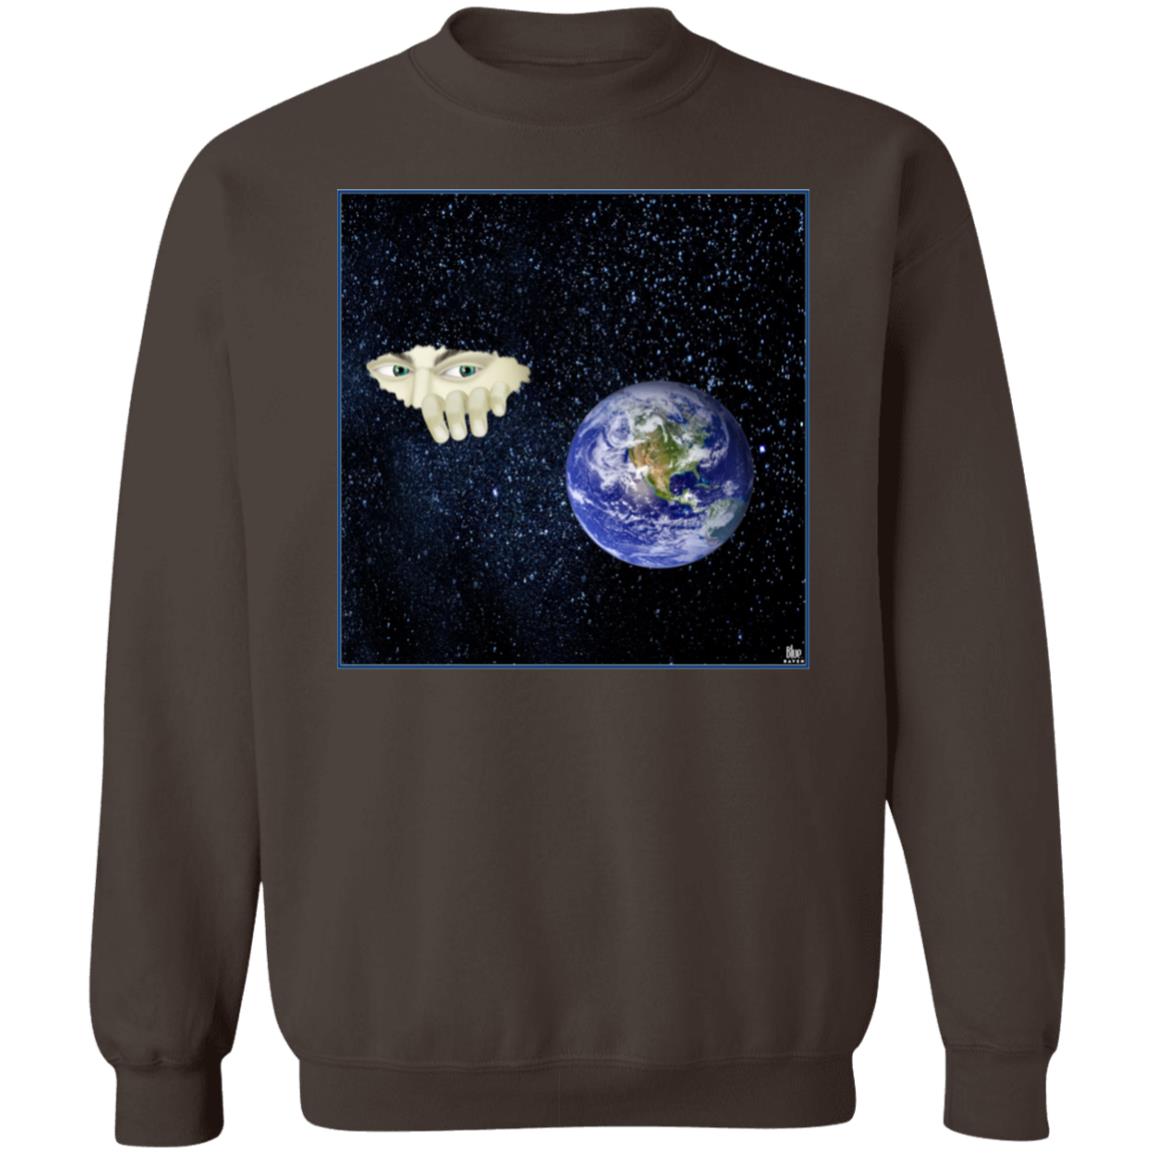 Somewhere Out There - Unisex Crew Neck Sweatshirt